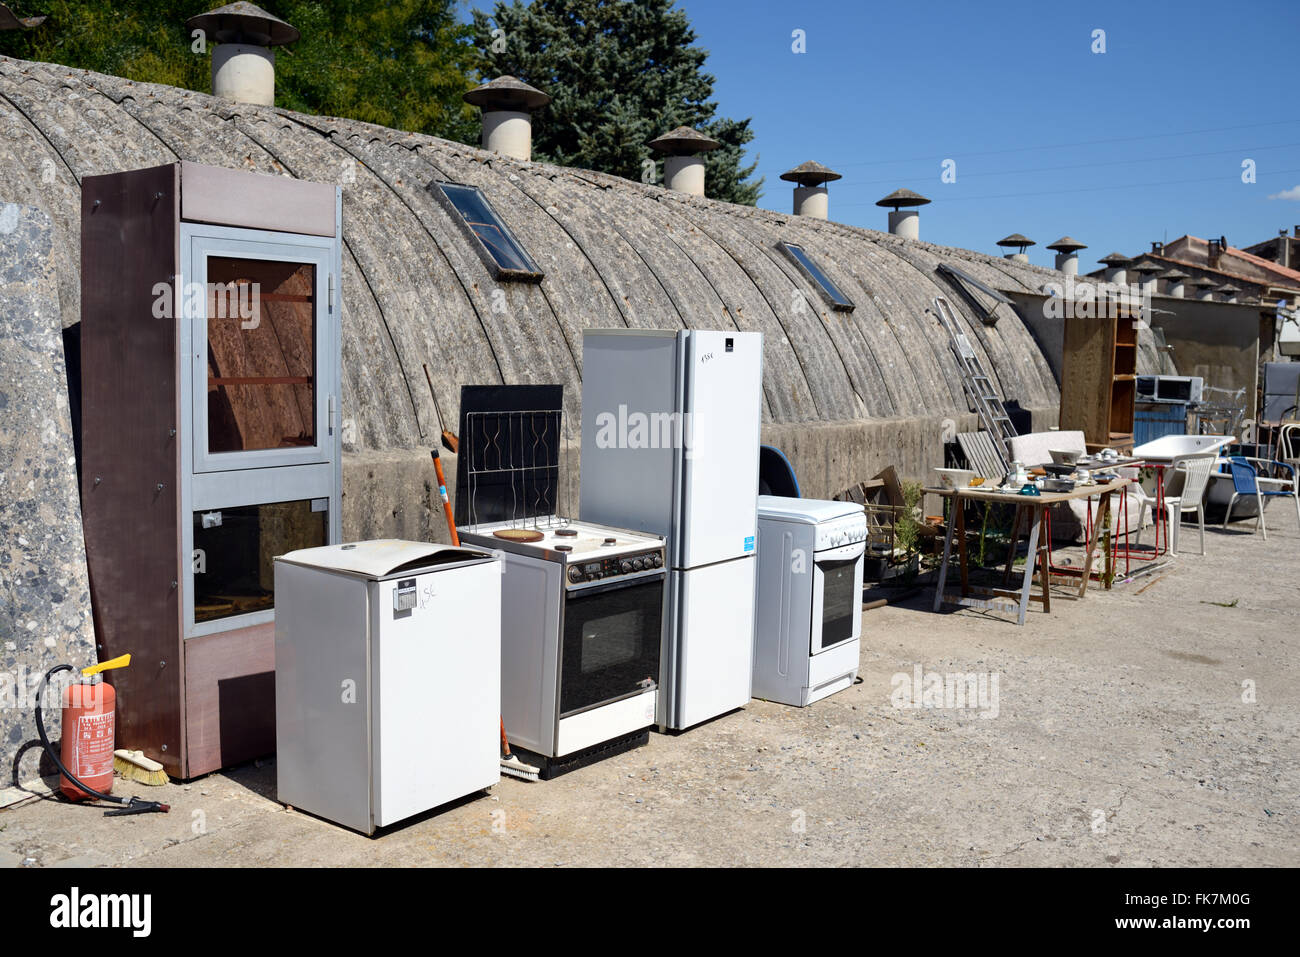 Second-Hand, Secondhand or Recycled White Goods or Domestic Appliances Cookers & Fridges For sale in a Junk Shop or Junk Store Stock Photo